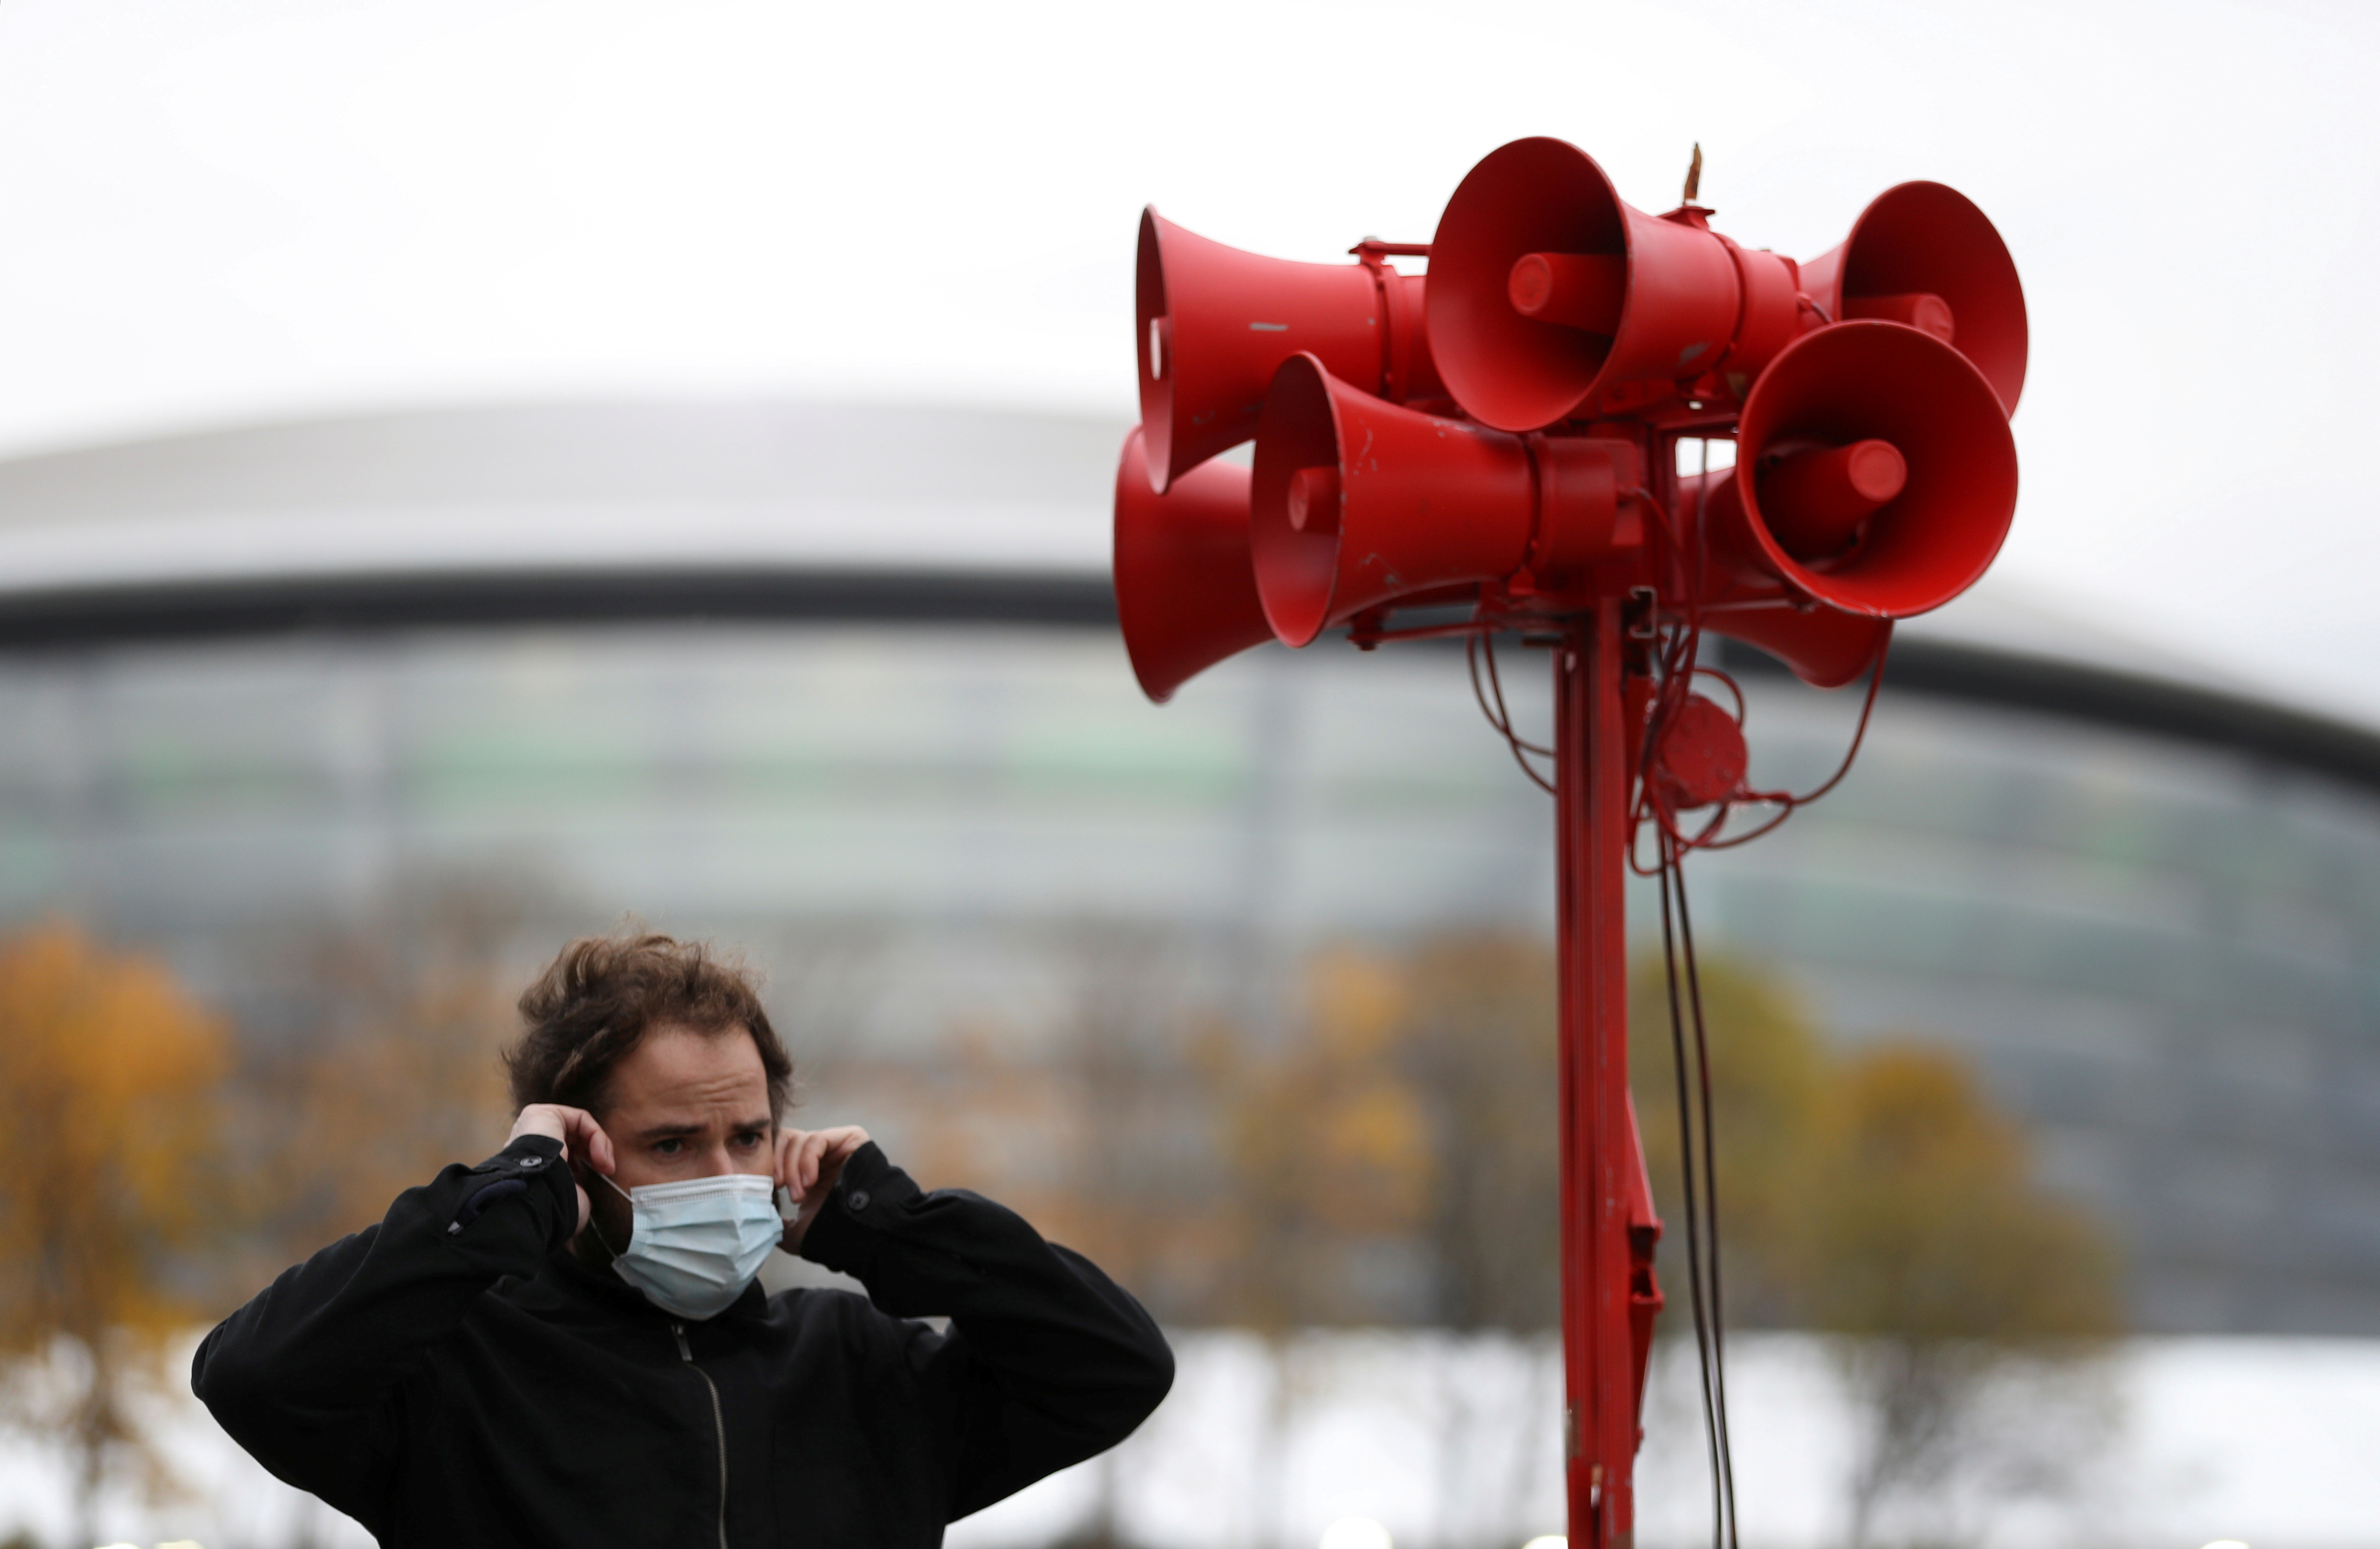 Protesters set off a siren opposite the UN Climate Change Conference (Cop26) venue in Glasgow